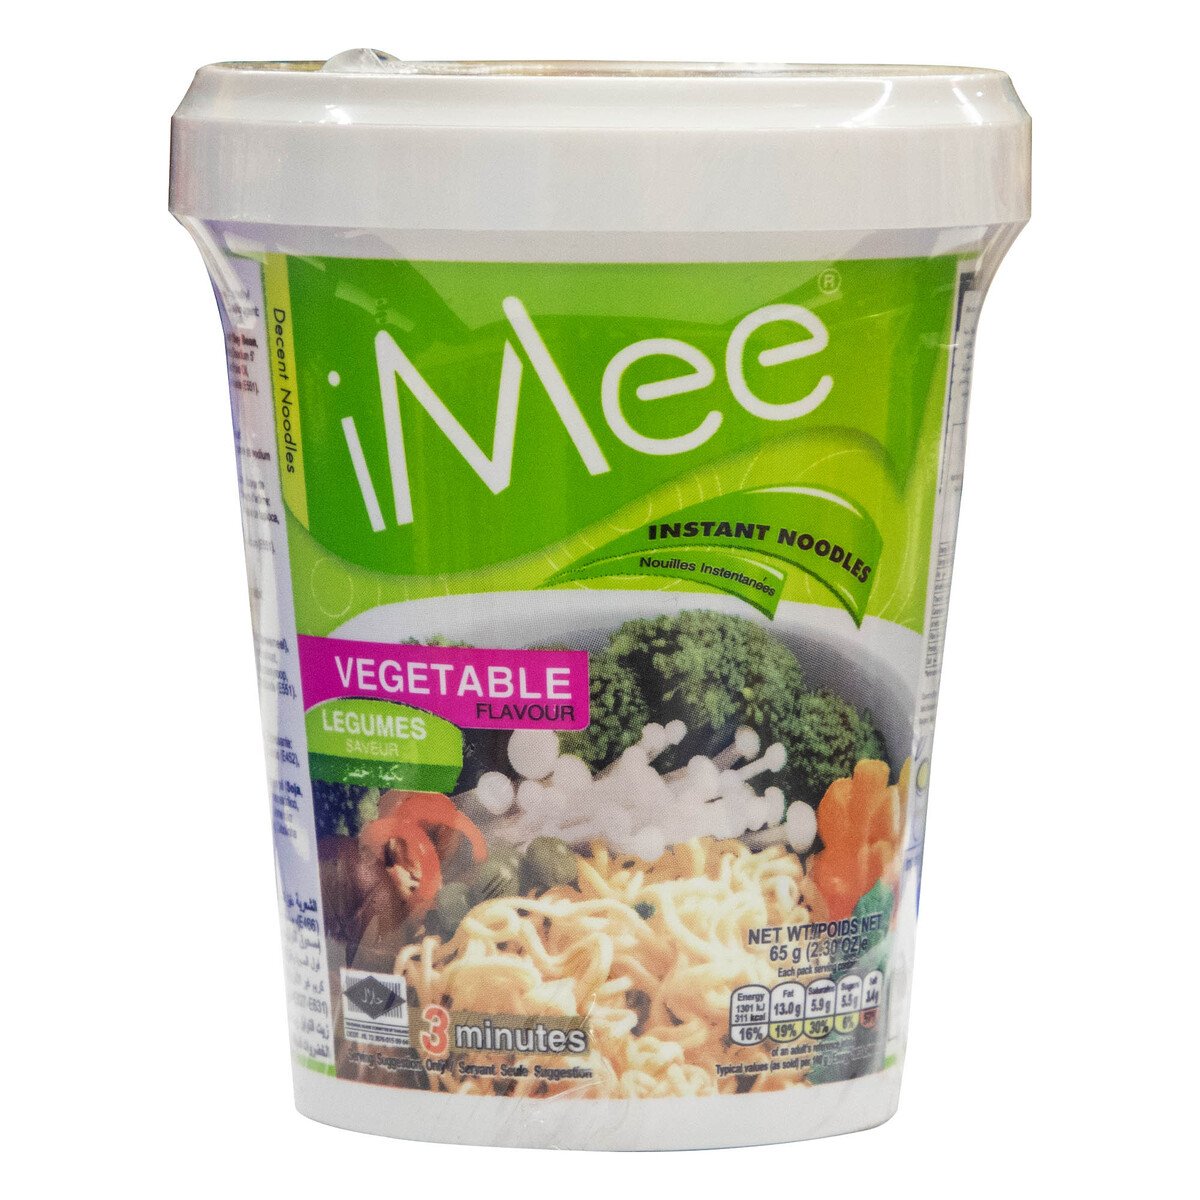 Imee Vegetable Instant Cup Noodles 65 g